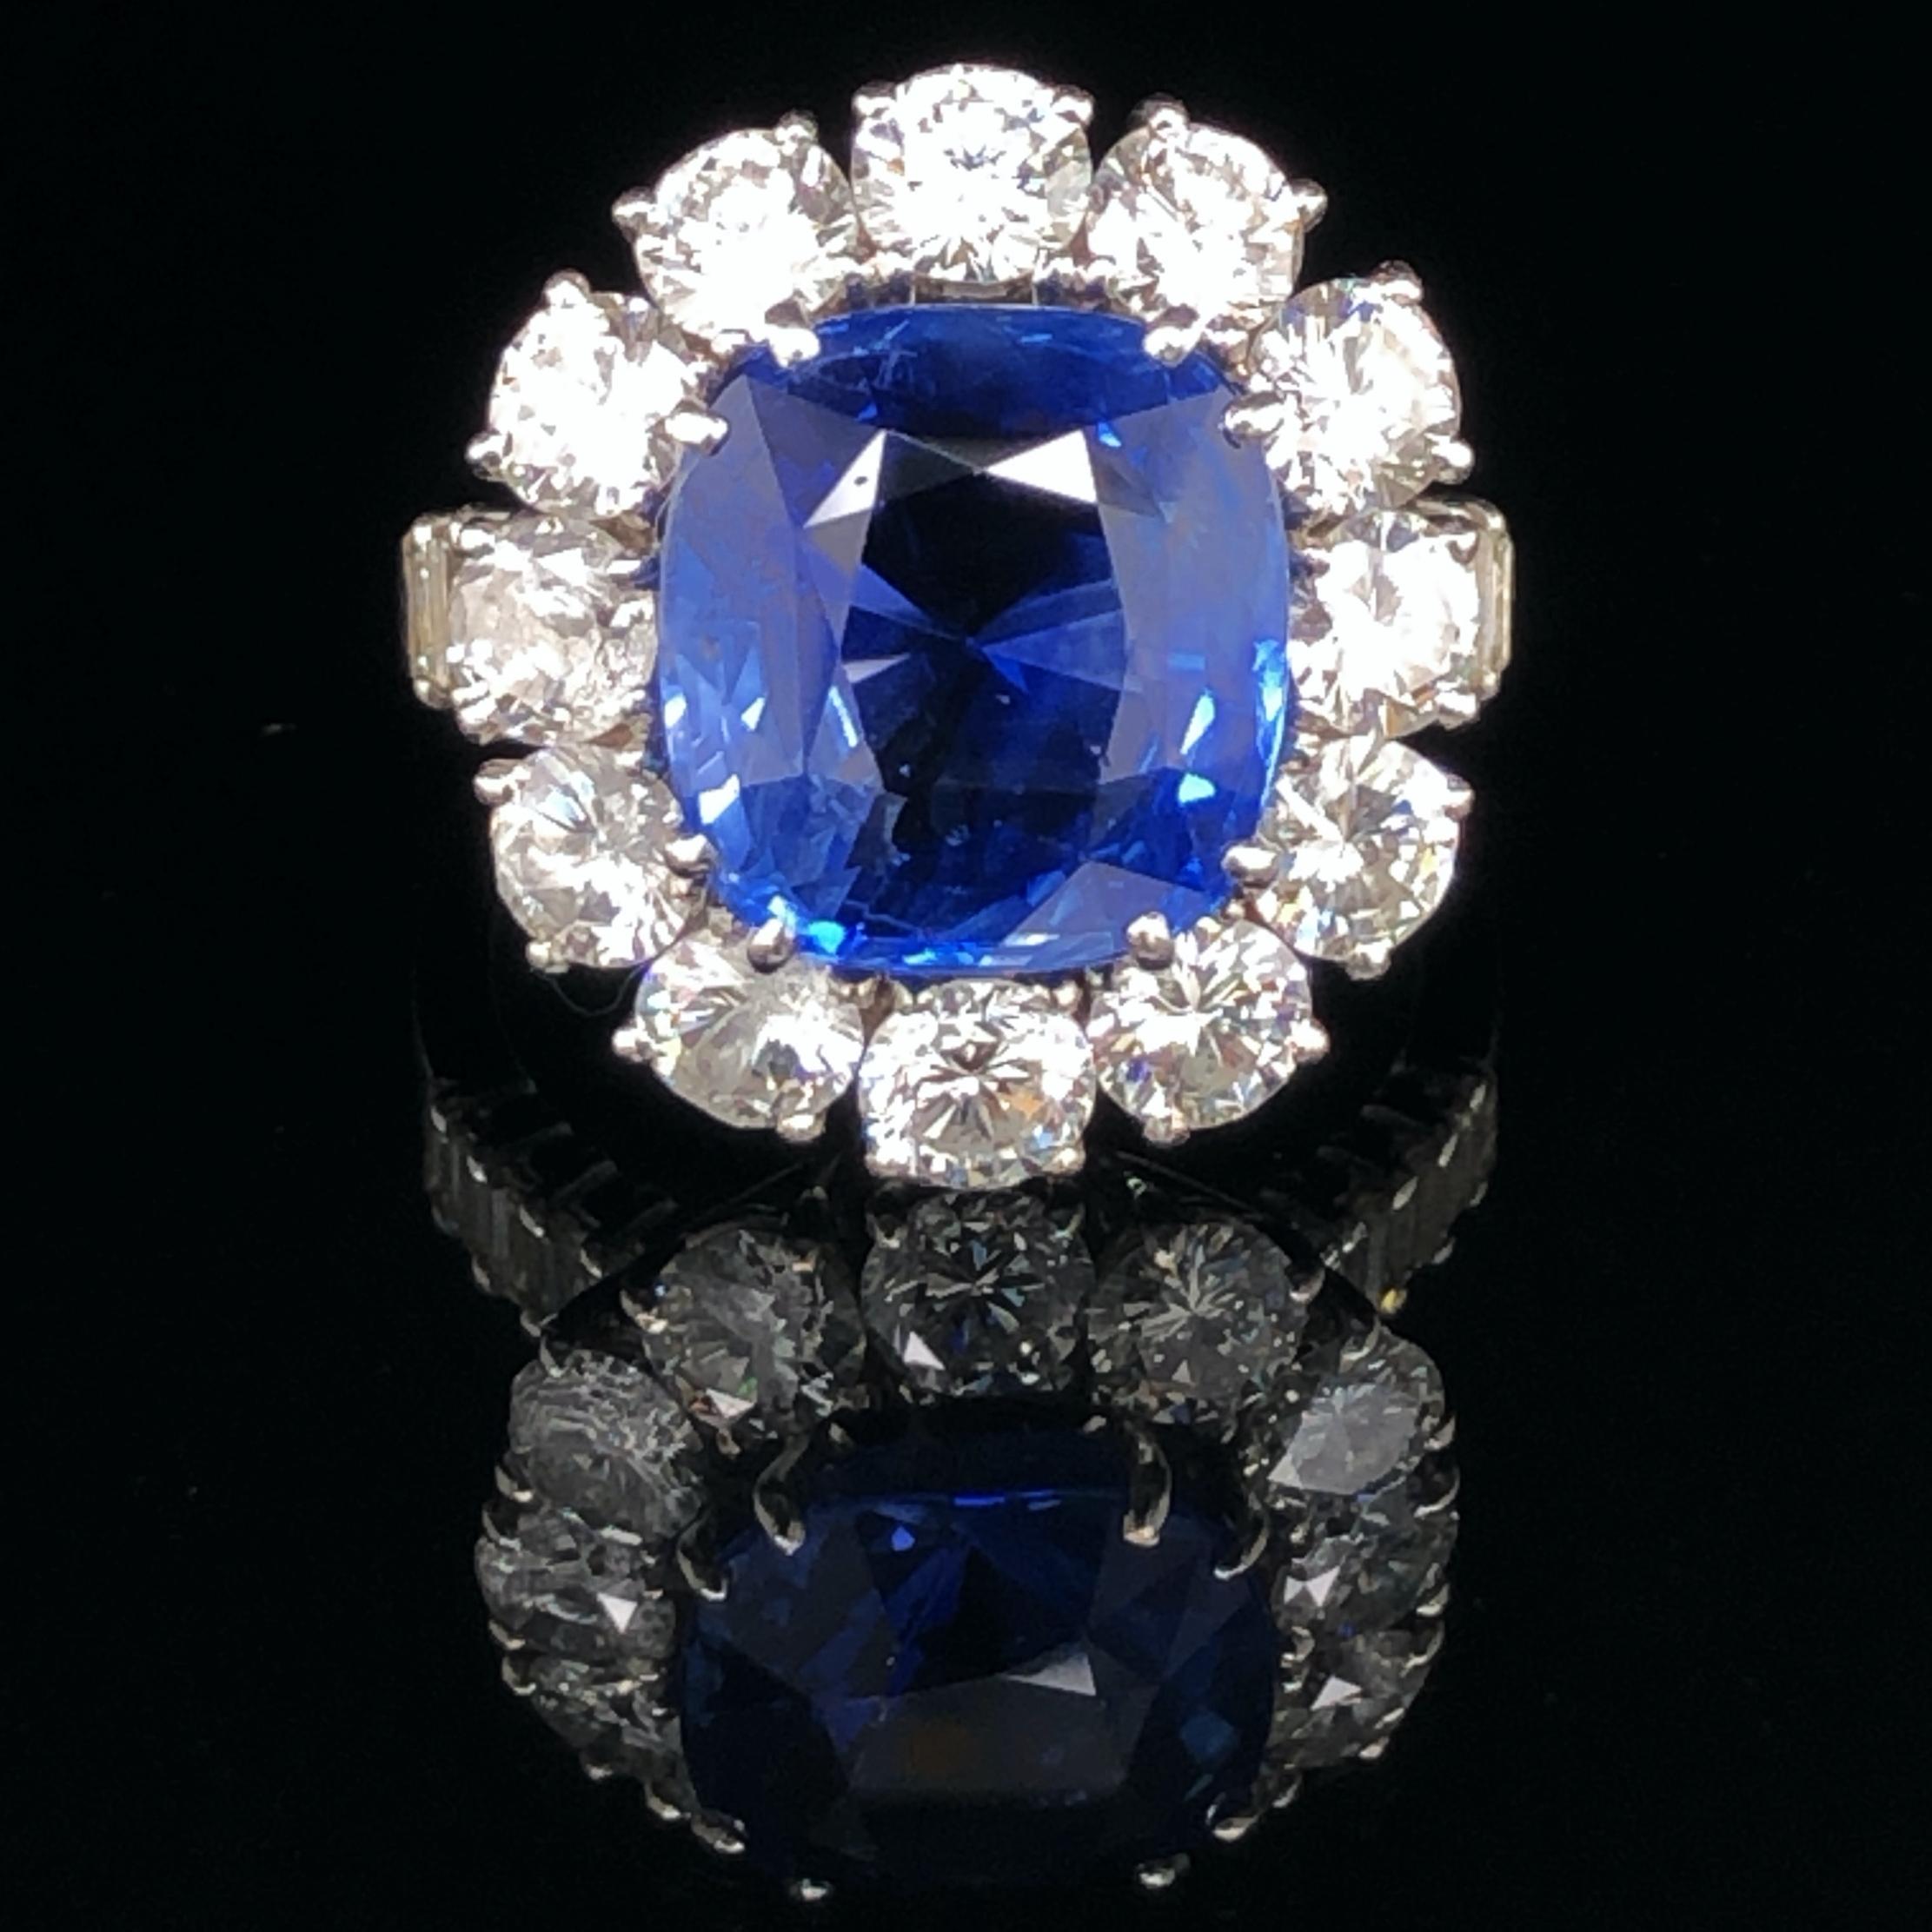 A beautiful sapphire and diamond Lady Diana ring in platinum. The centre sapphire weighs 8.00 carats, is not heated and of Ceylon origin. It has a soft, yet strong blue colour with no eye visible and only very minute inclusions, which also indicate